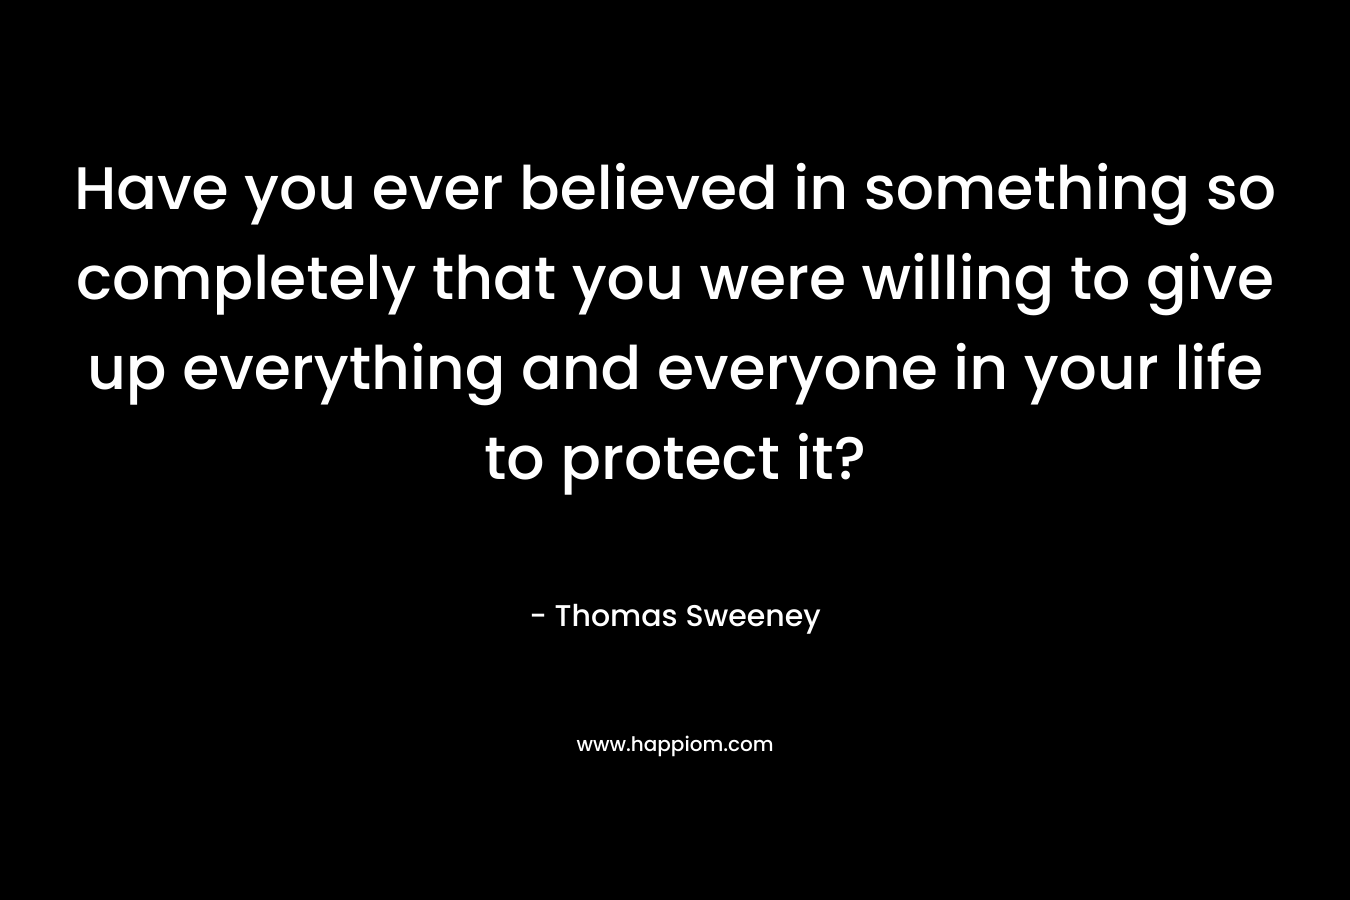 Have you ever believed in something so completely that you were willing to give up everything and everyone in your life to protect it?